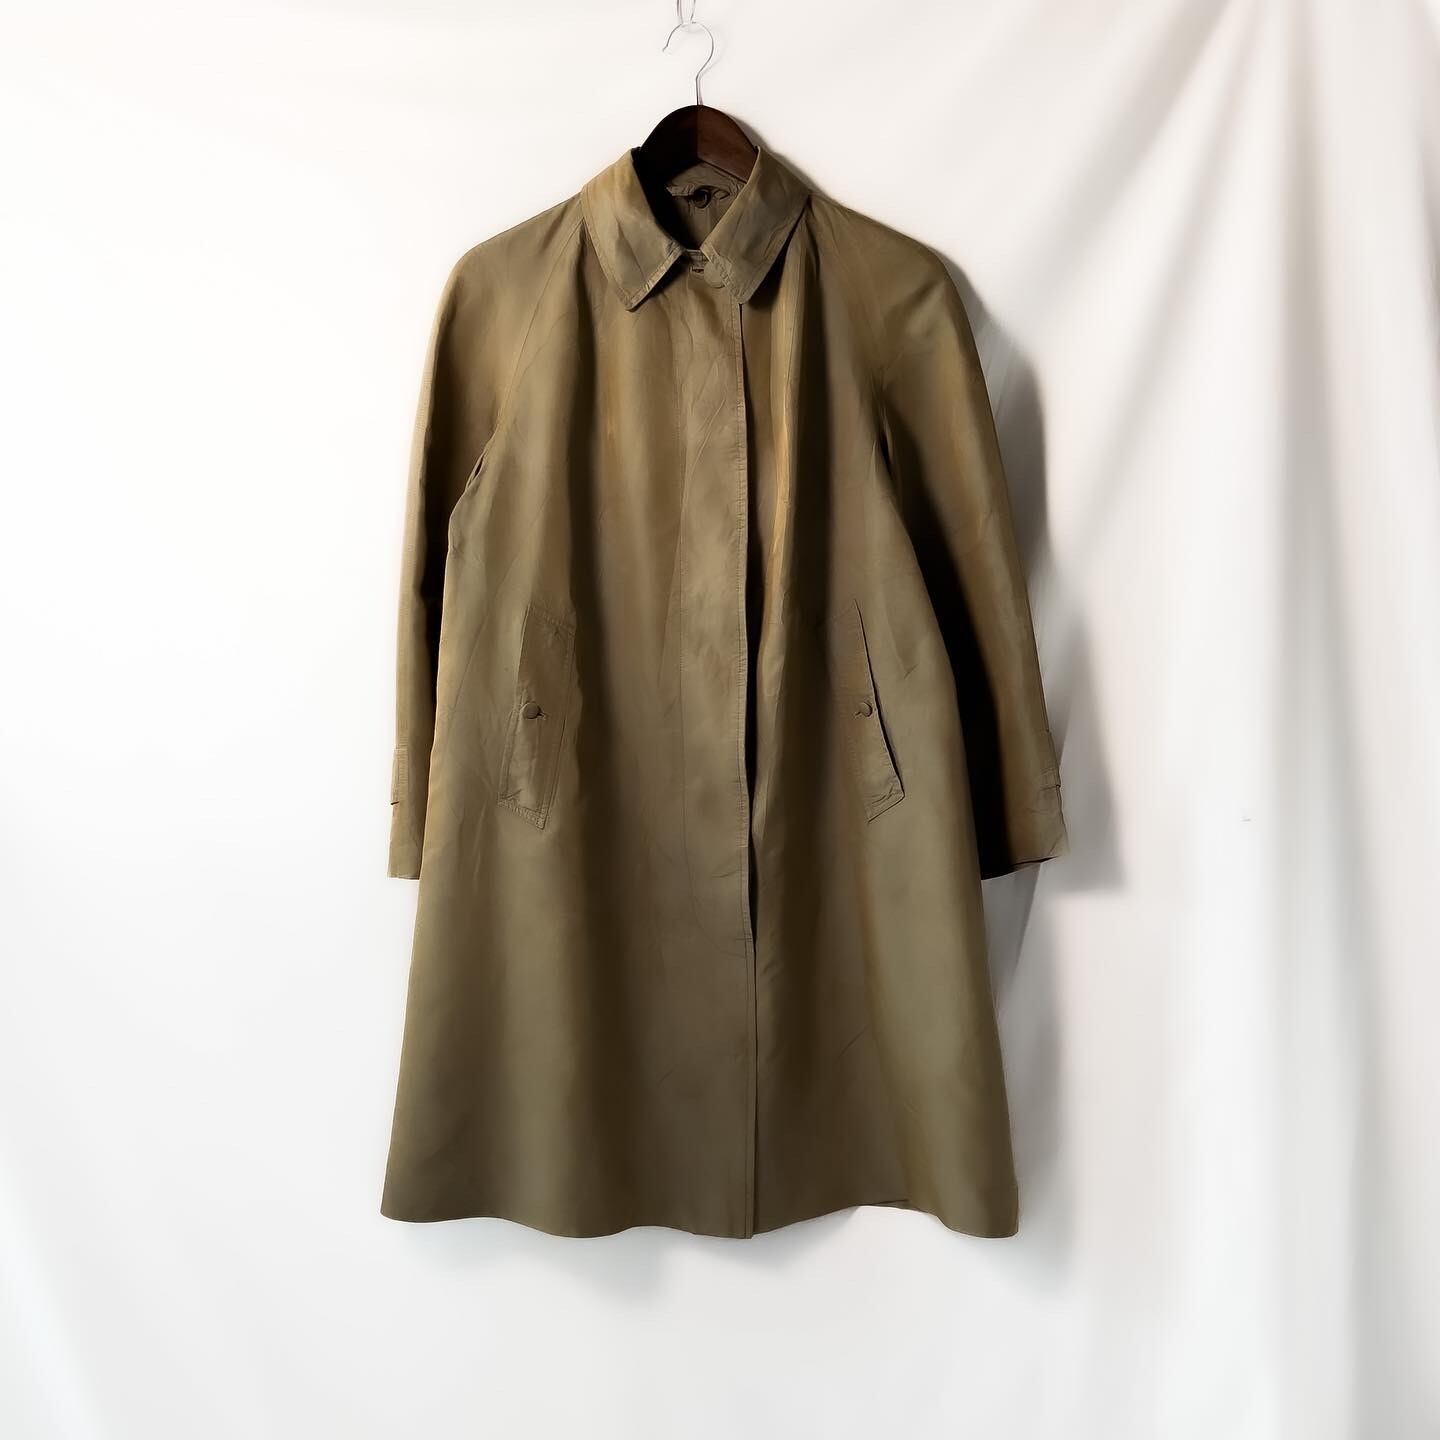 About 70s “BURBERRYS” Balmacaan coat made in France! 玉虫色 70年代